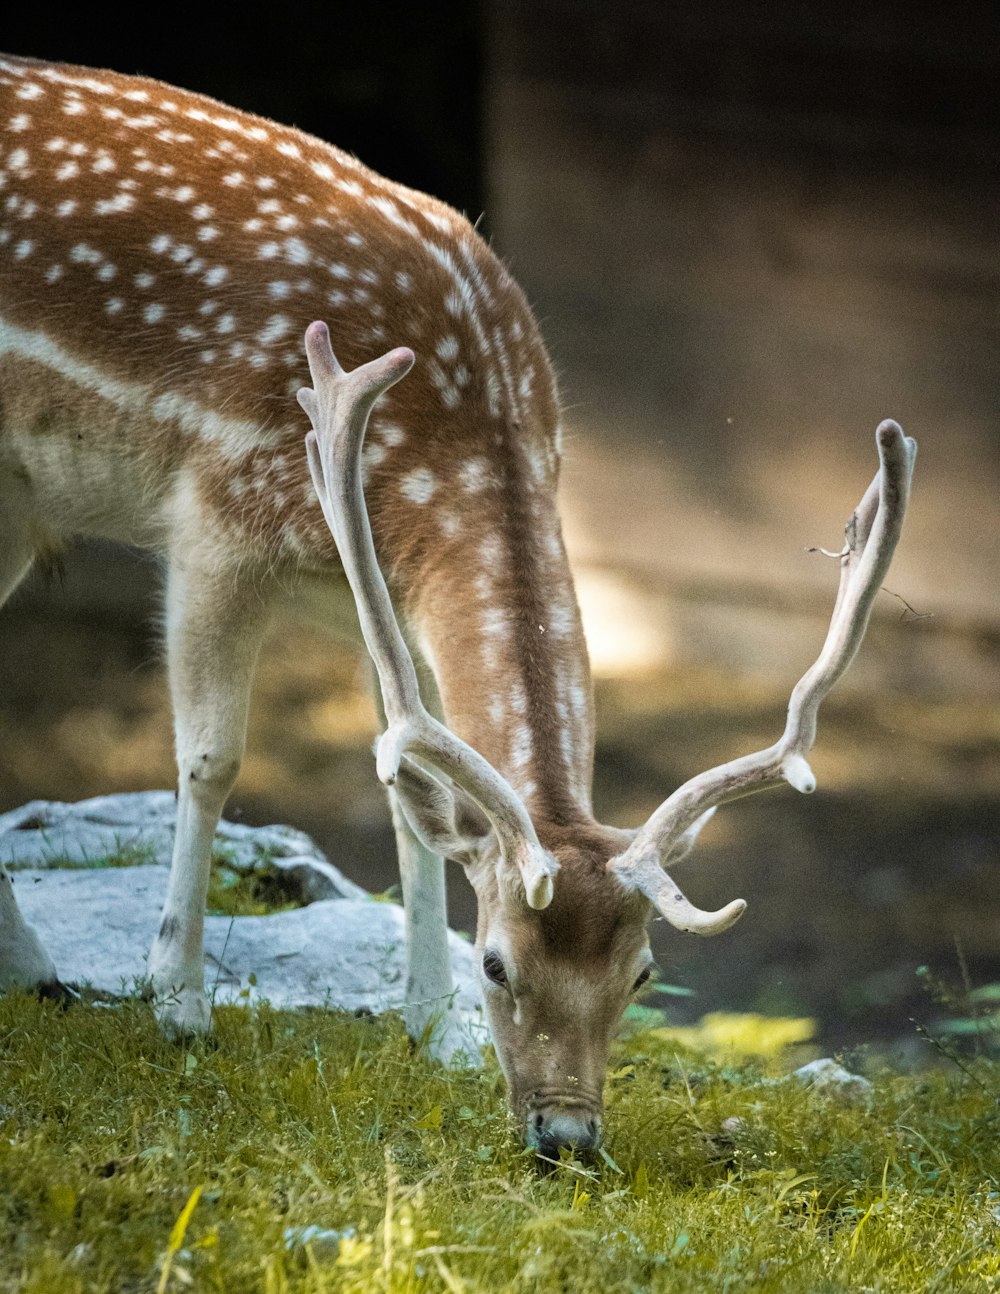 a deer grazing on grass in a zoo enclosure